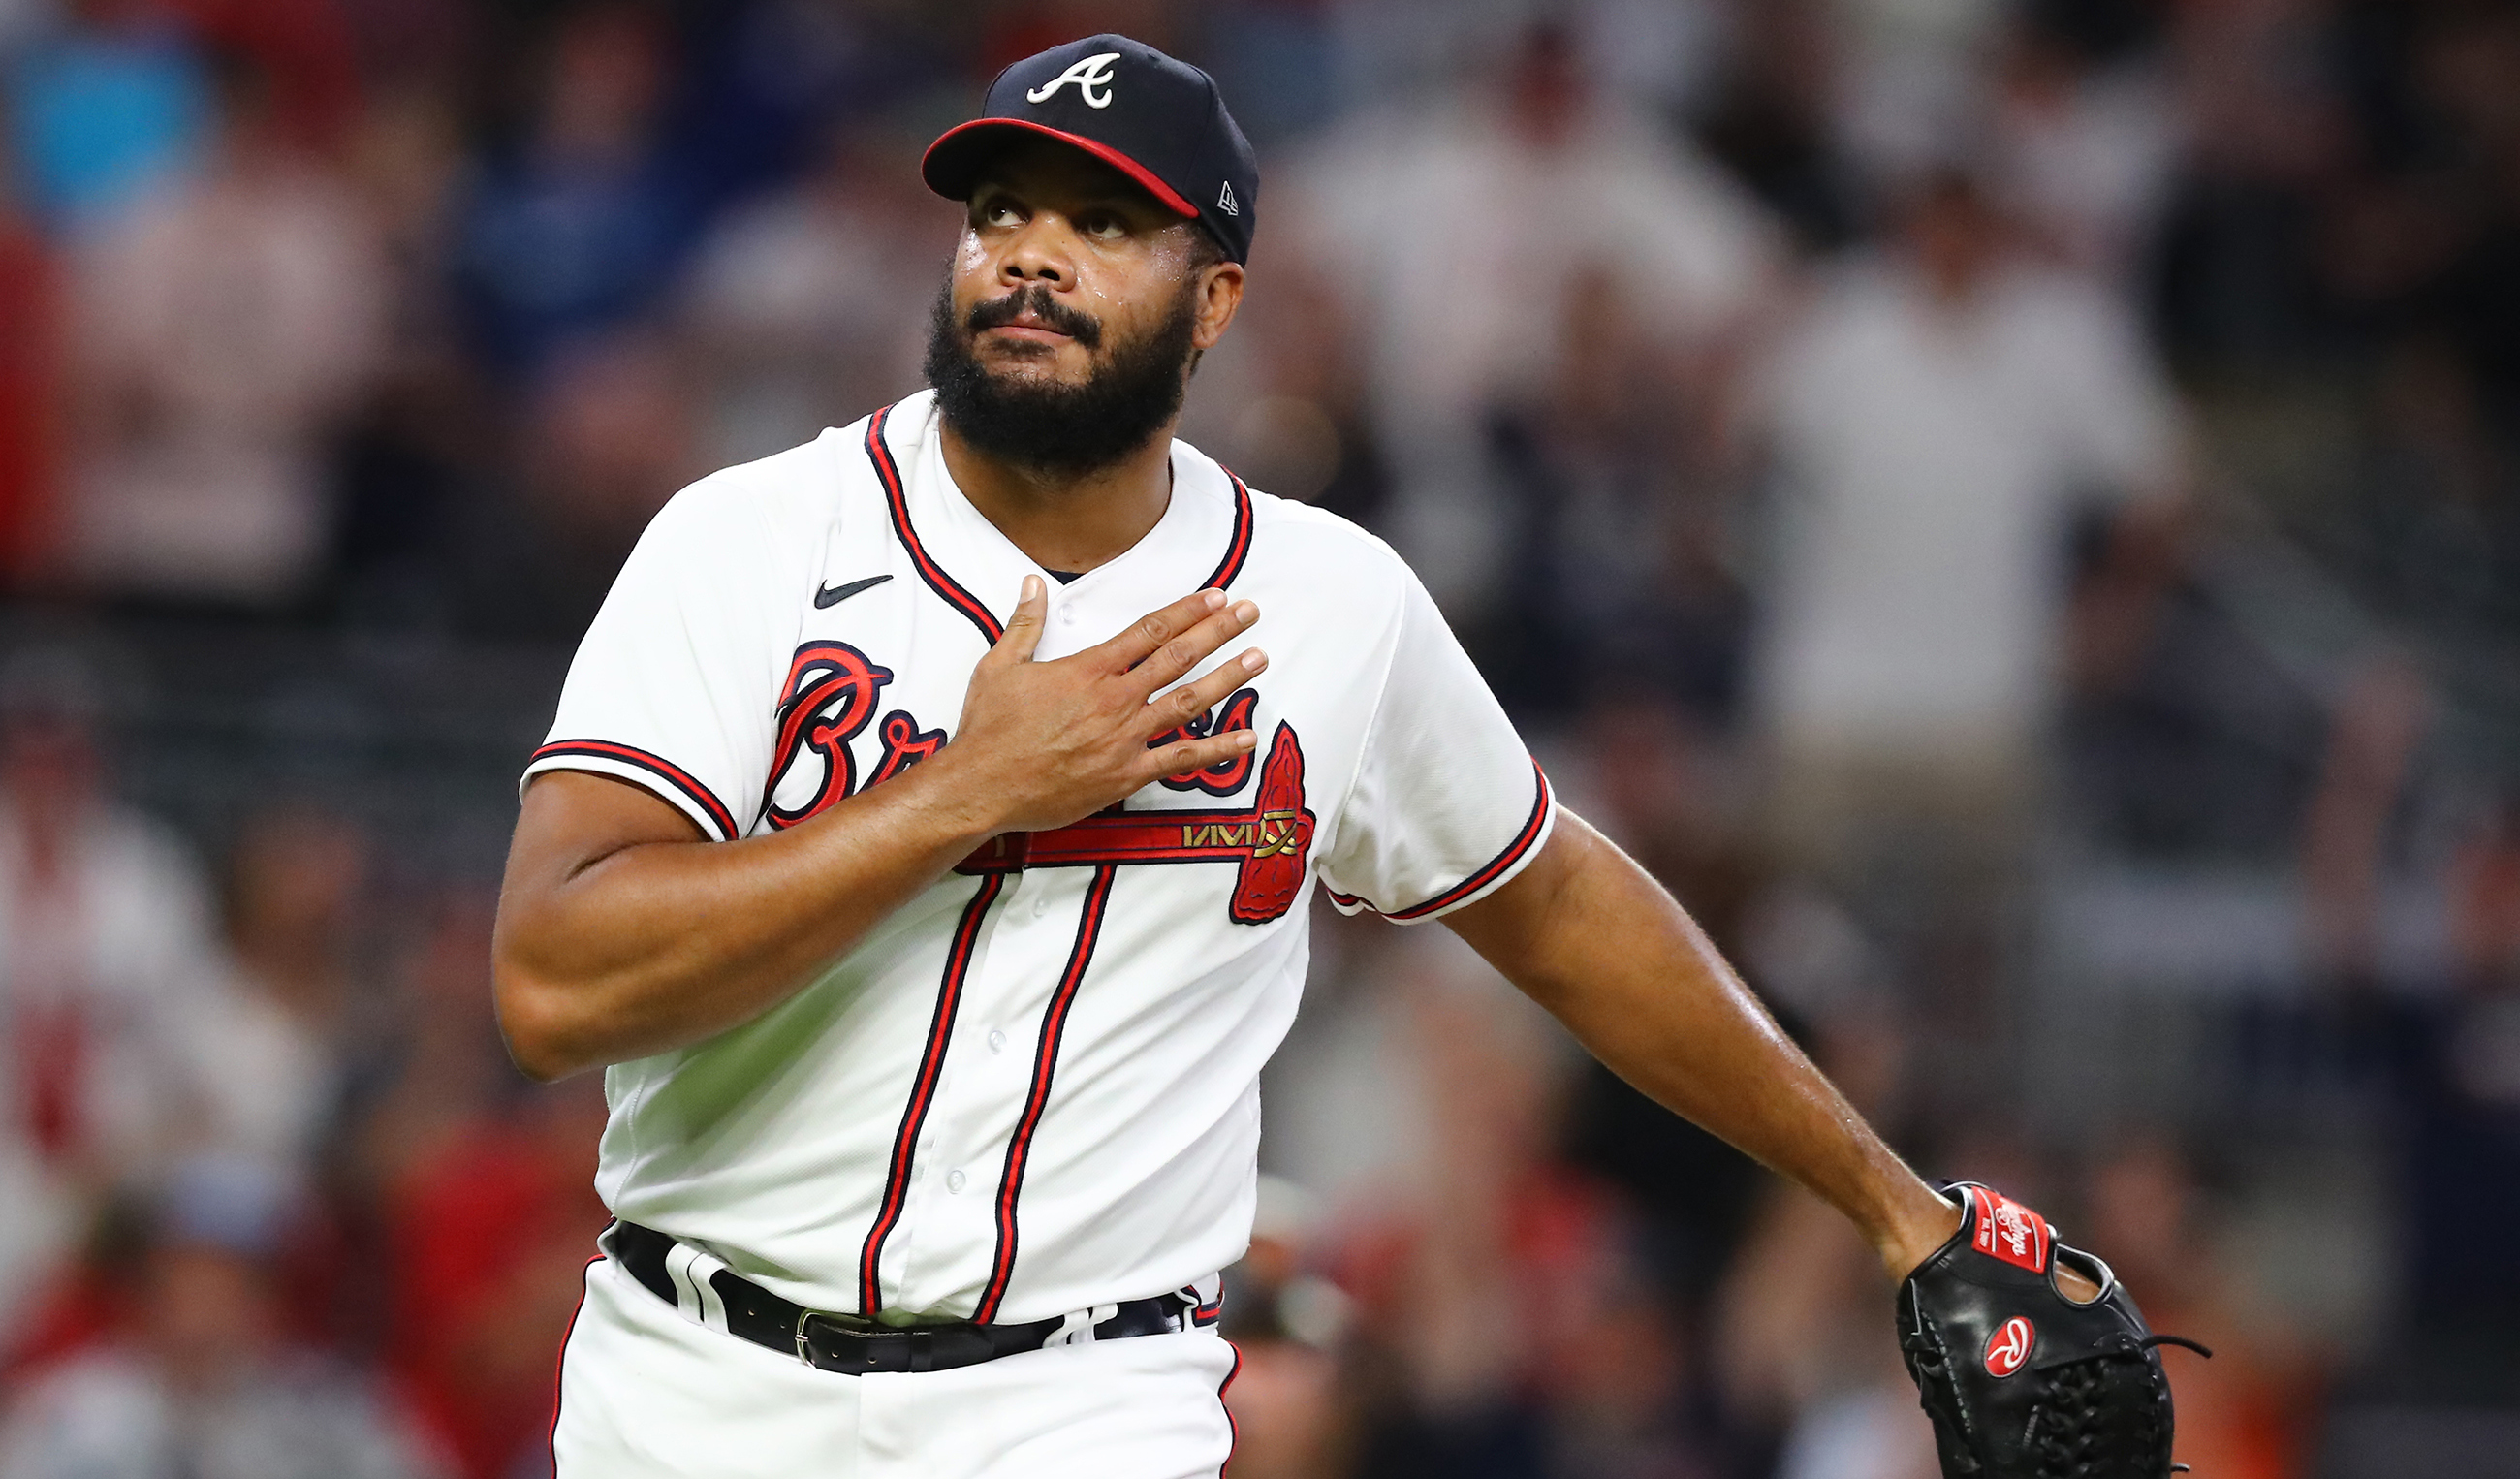 Braves: Have we seen the last of Kenley Jansen closing games?